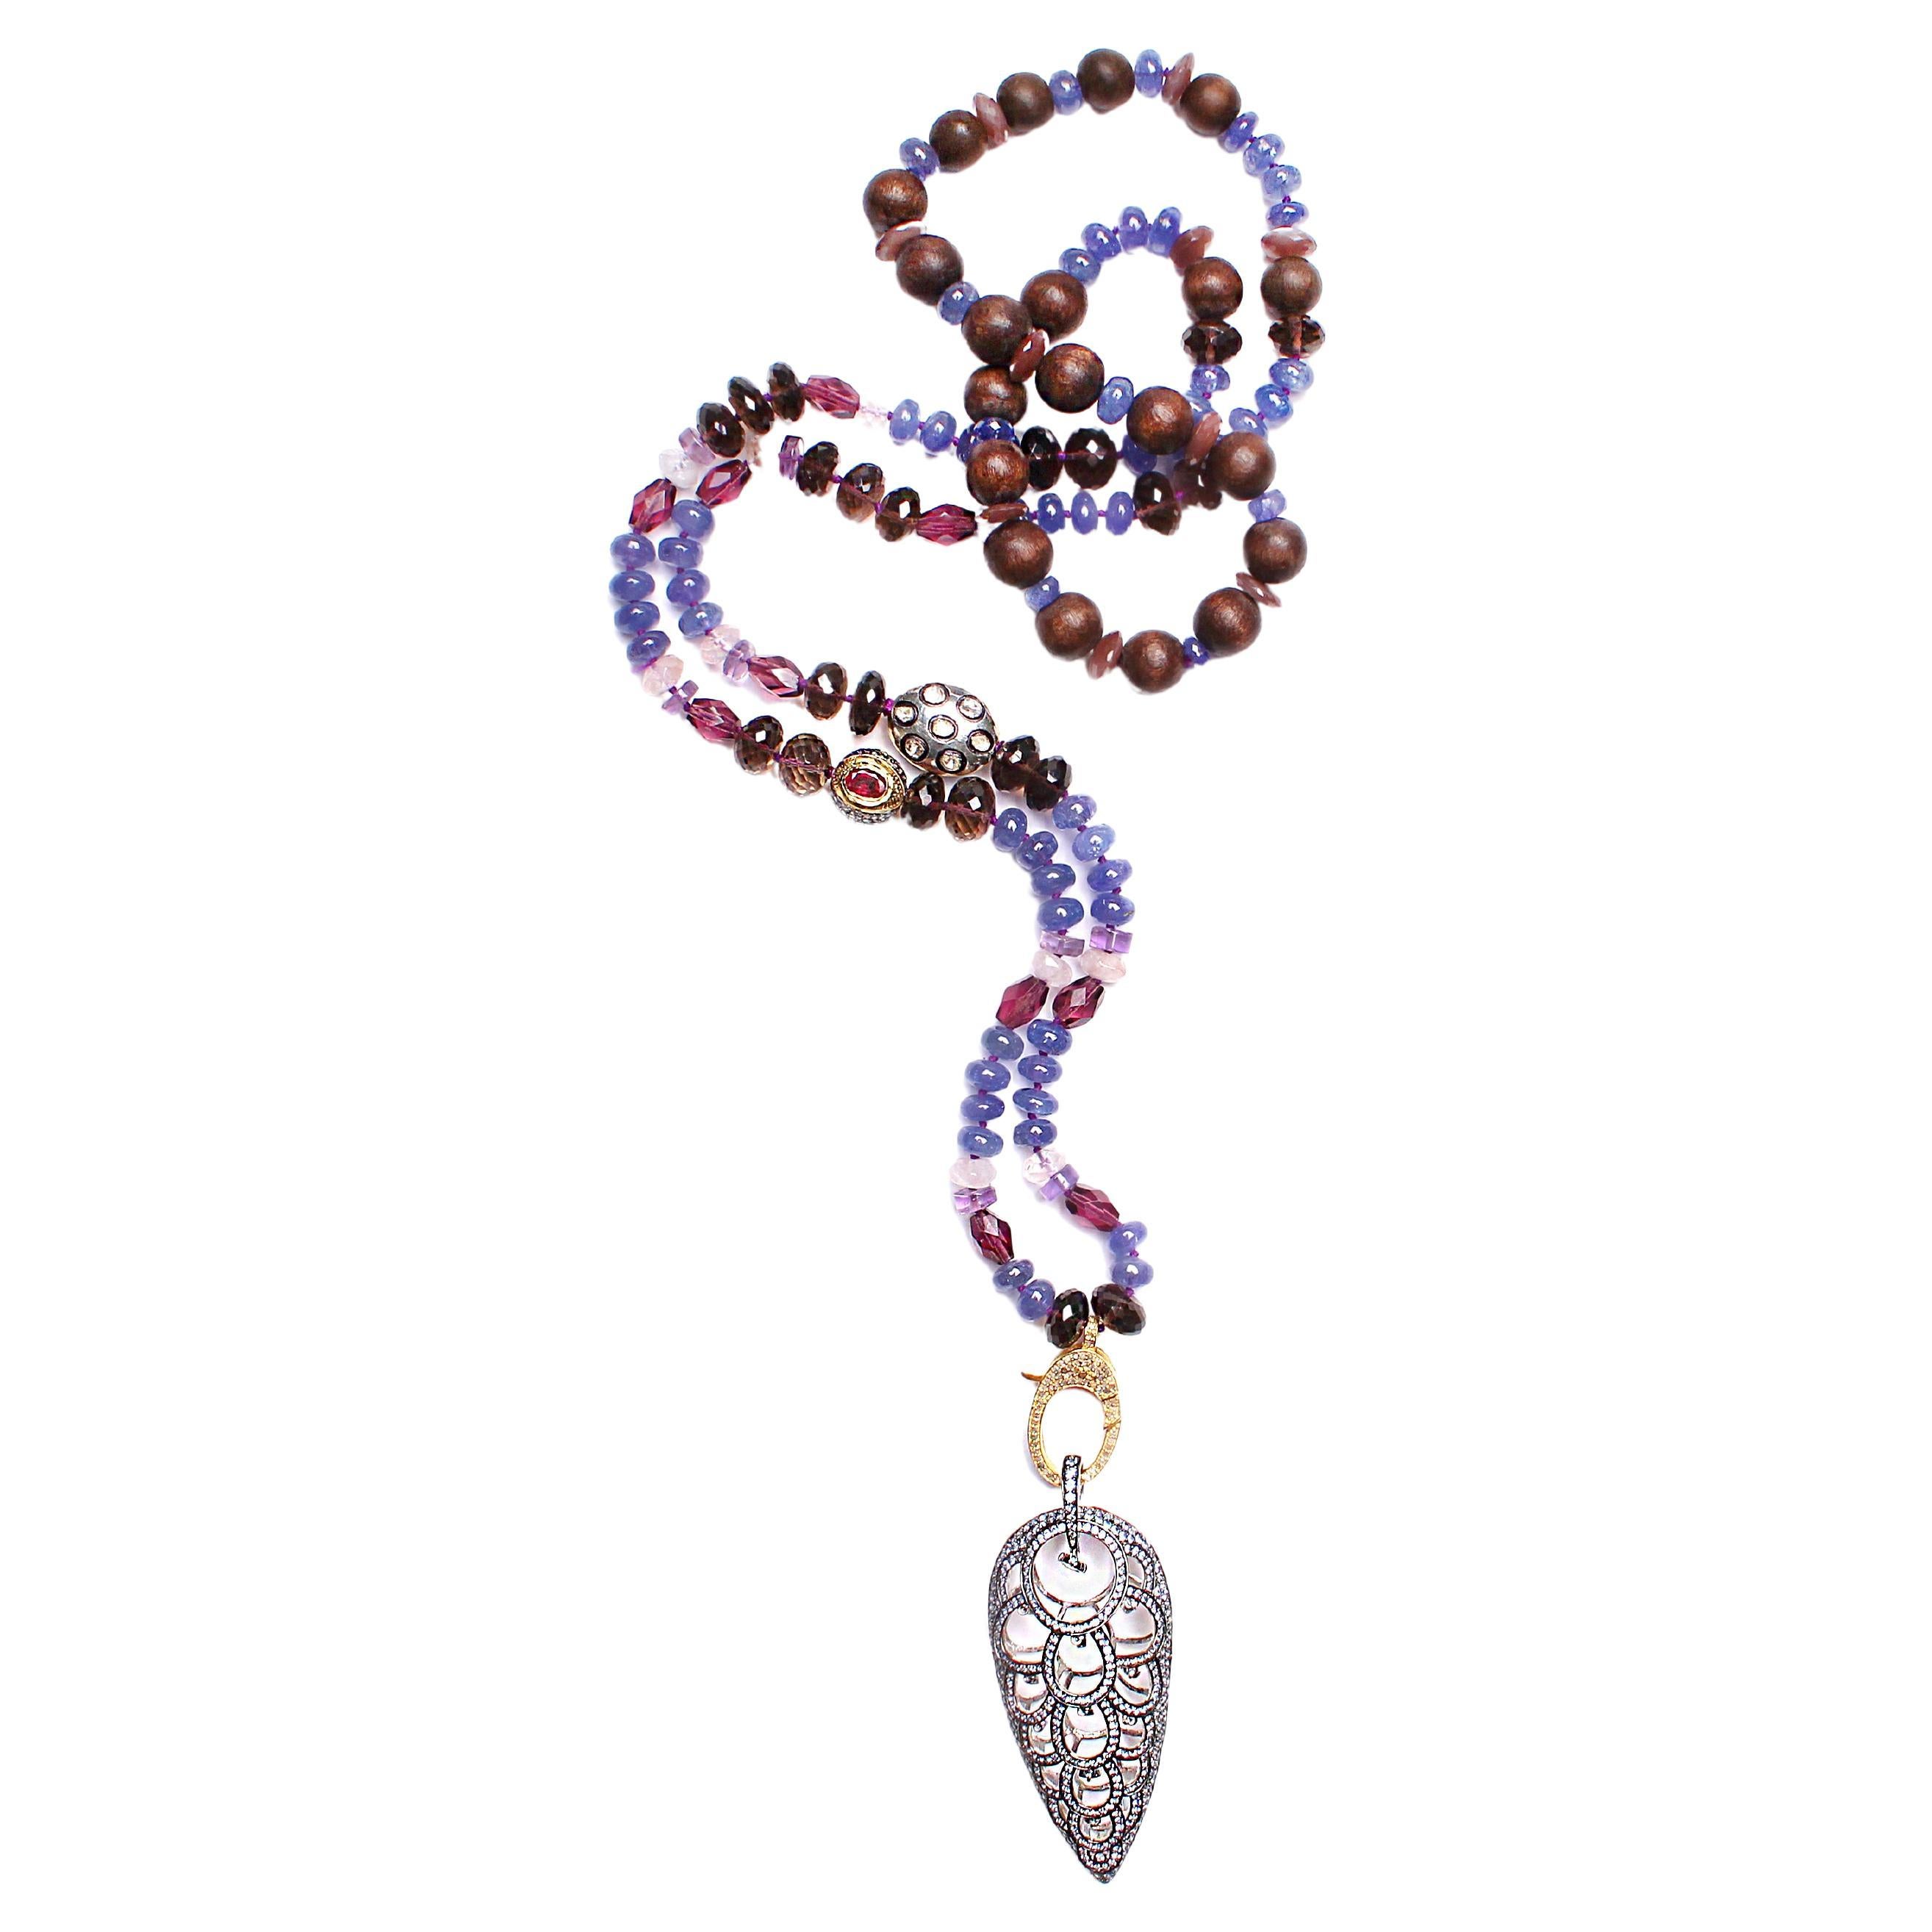 CLARISSA BRONFMAN Tazanite Diamond Sapphire Ruby Wood Feather Beaded Necklace  For Sale